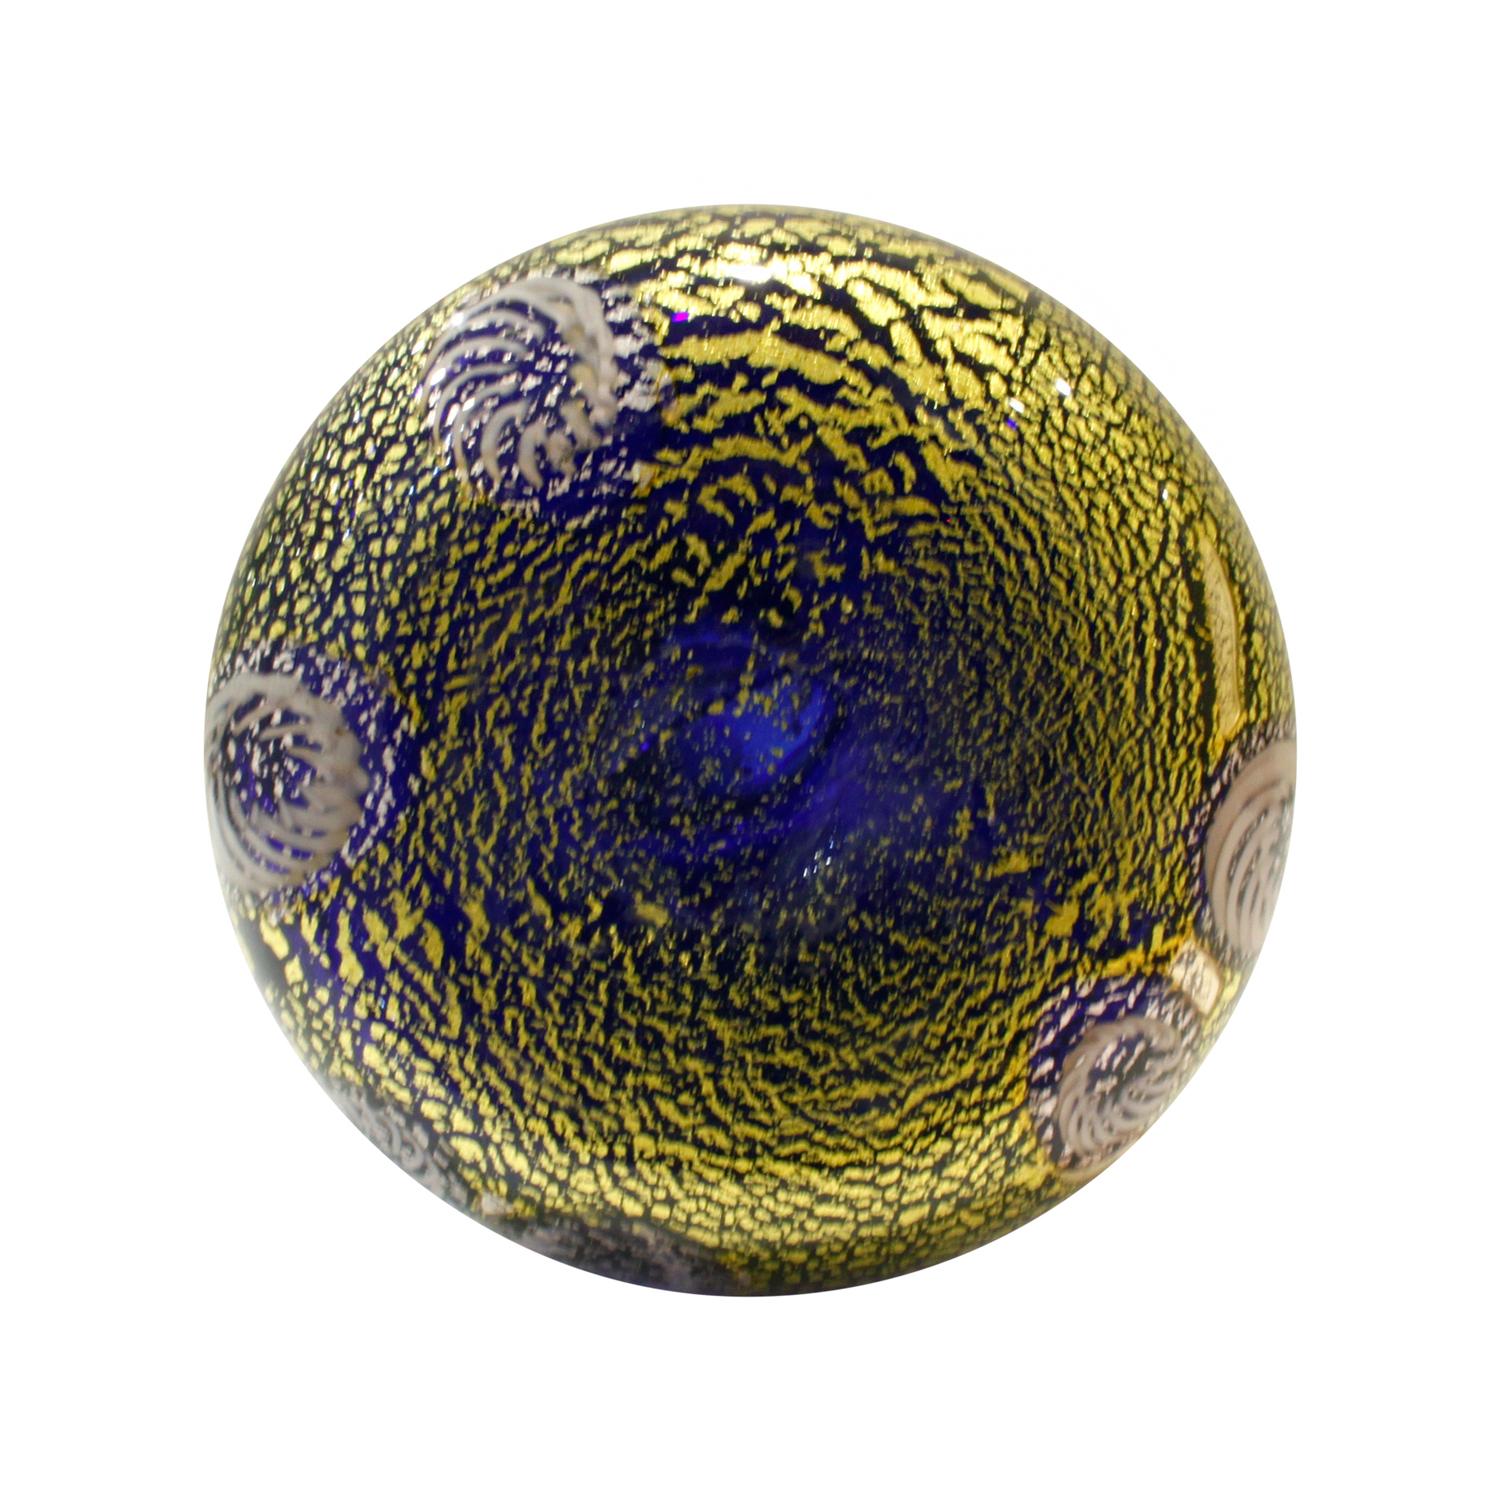 Hand-Crafted Giulio Radi Hand Blown Glass Vase with Murrhines and Gold Foil, circa 1950 For Sale